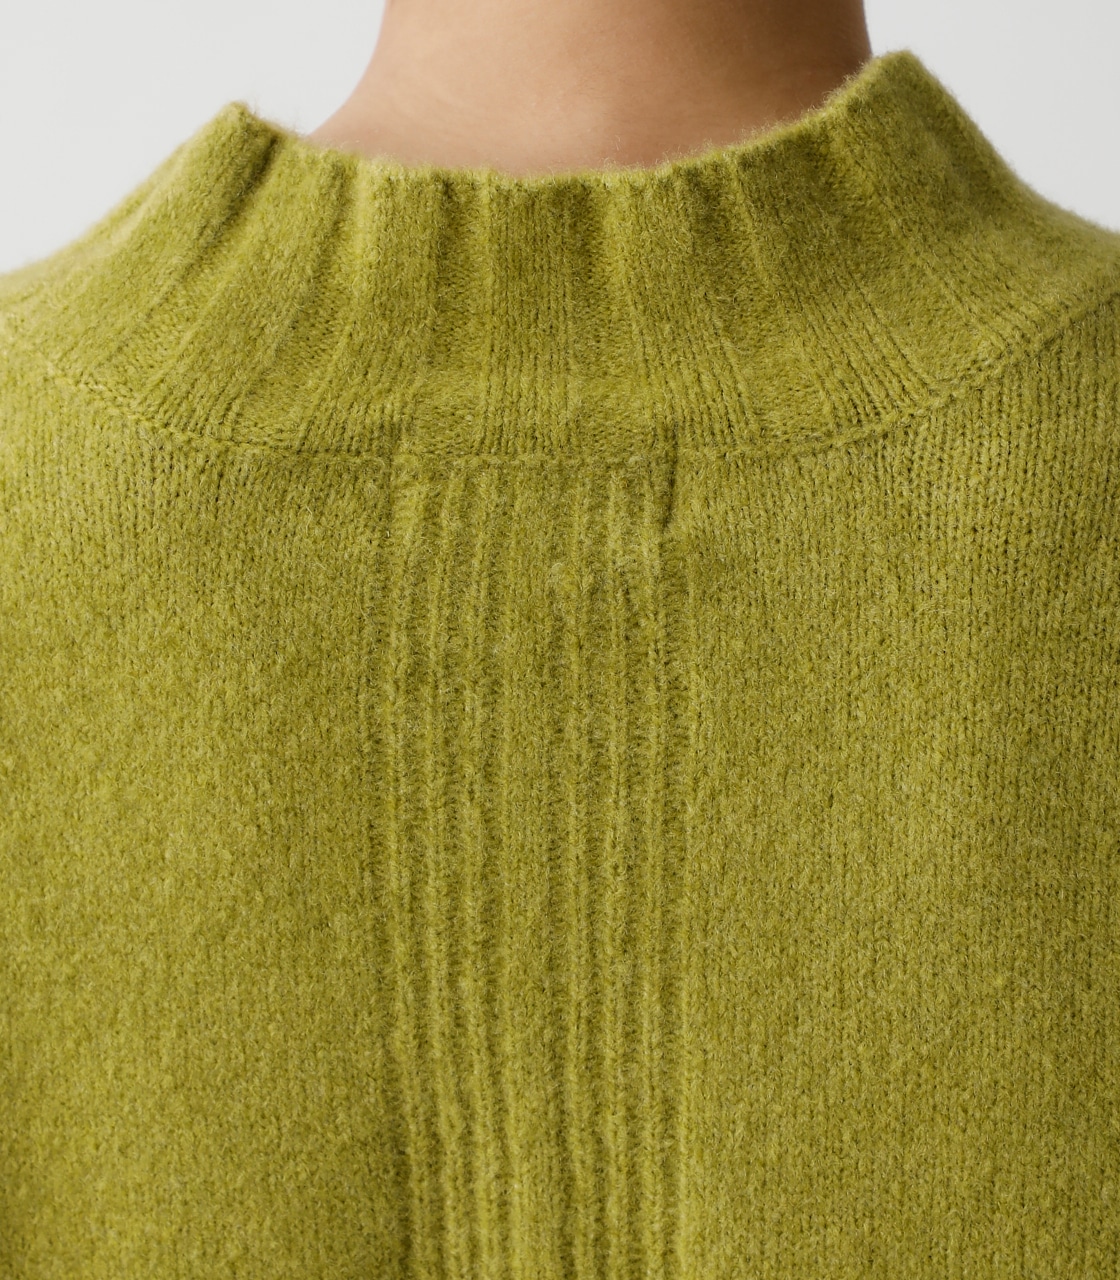 SOFT TOUCH HIGH NECK KNIT TOPS/ソフトタッチハイネックニットトップス 詳細画像 LIME 9